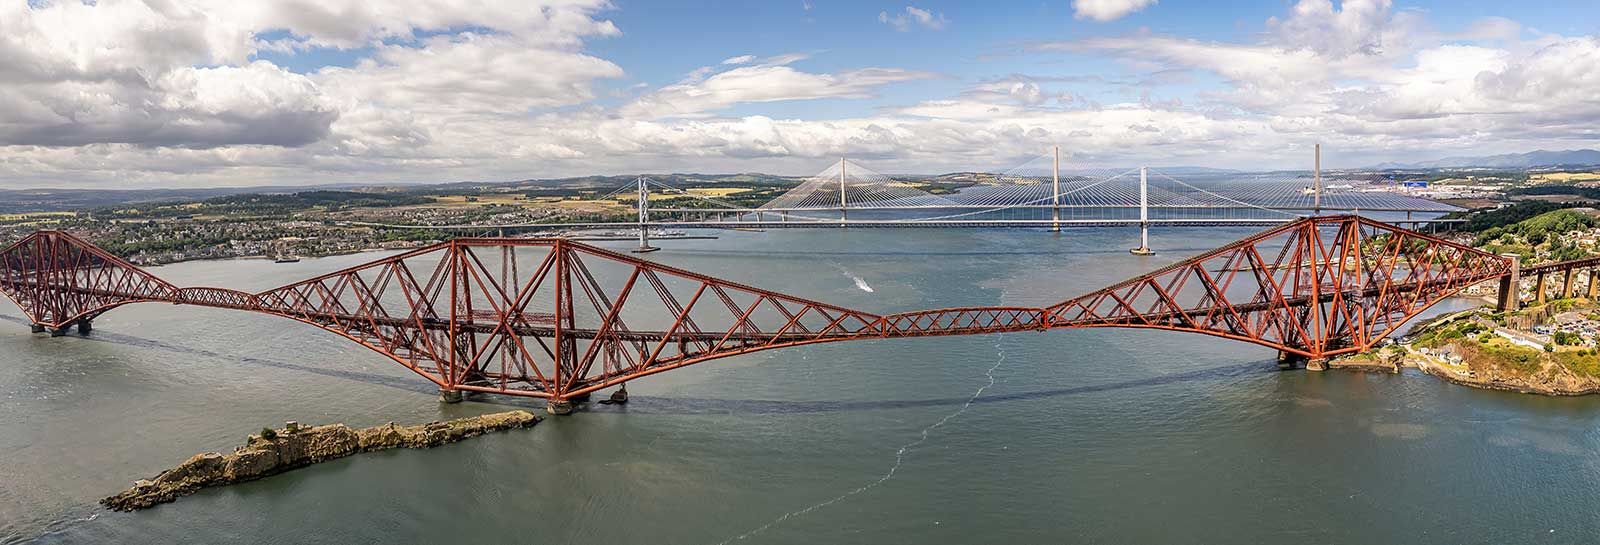 Aerial view of Forth bridges and Queensferry Crossing banner image